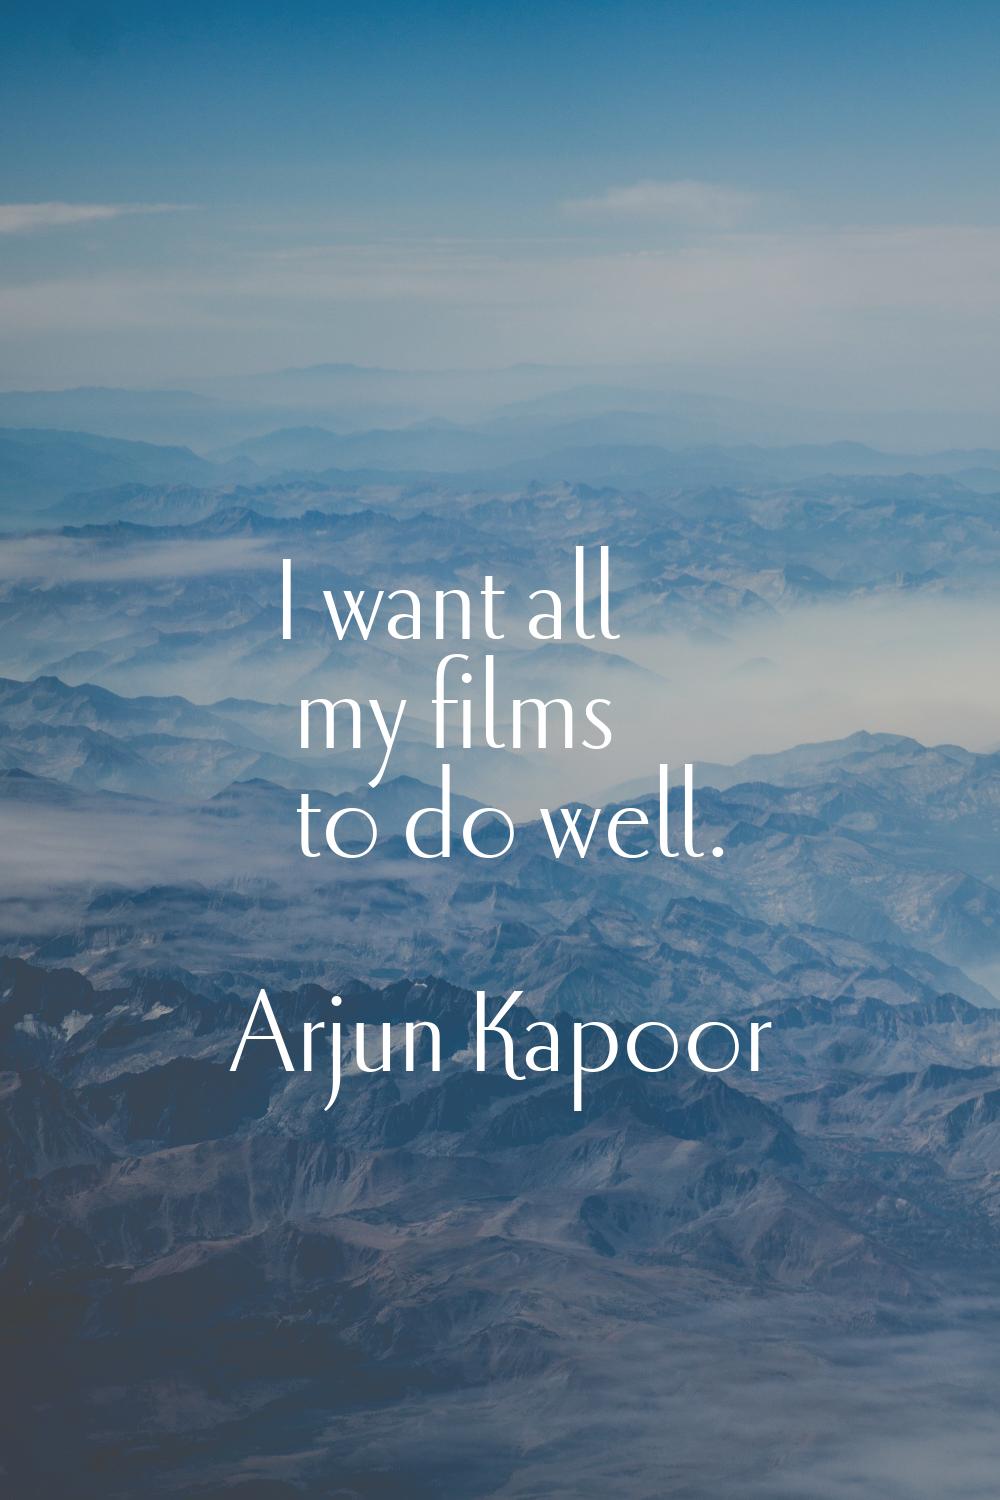 I want all my films to do well.